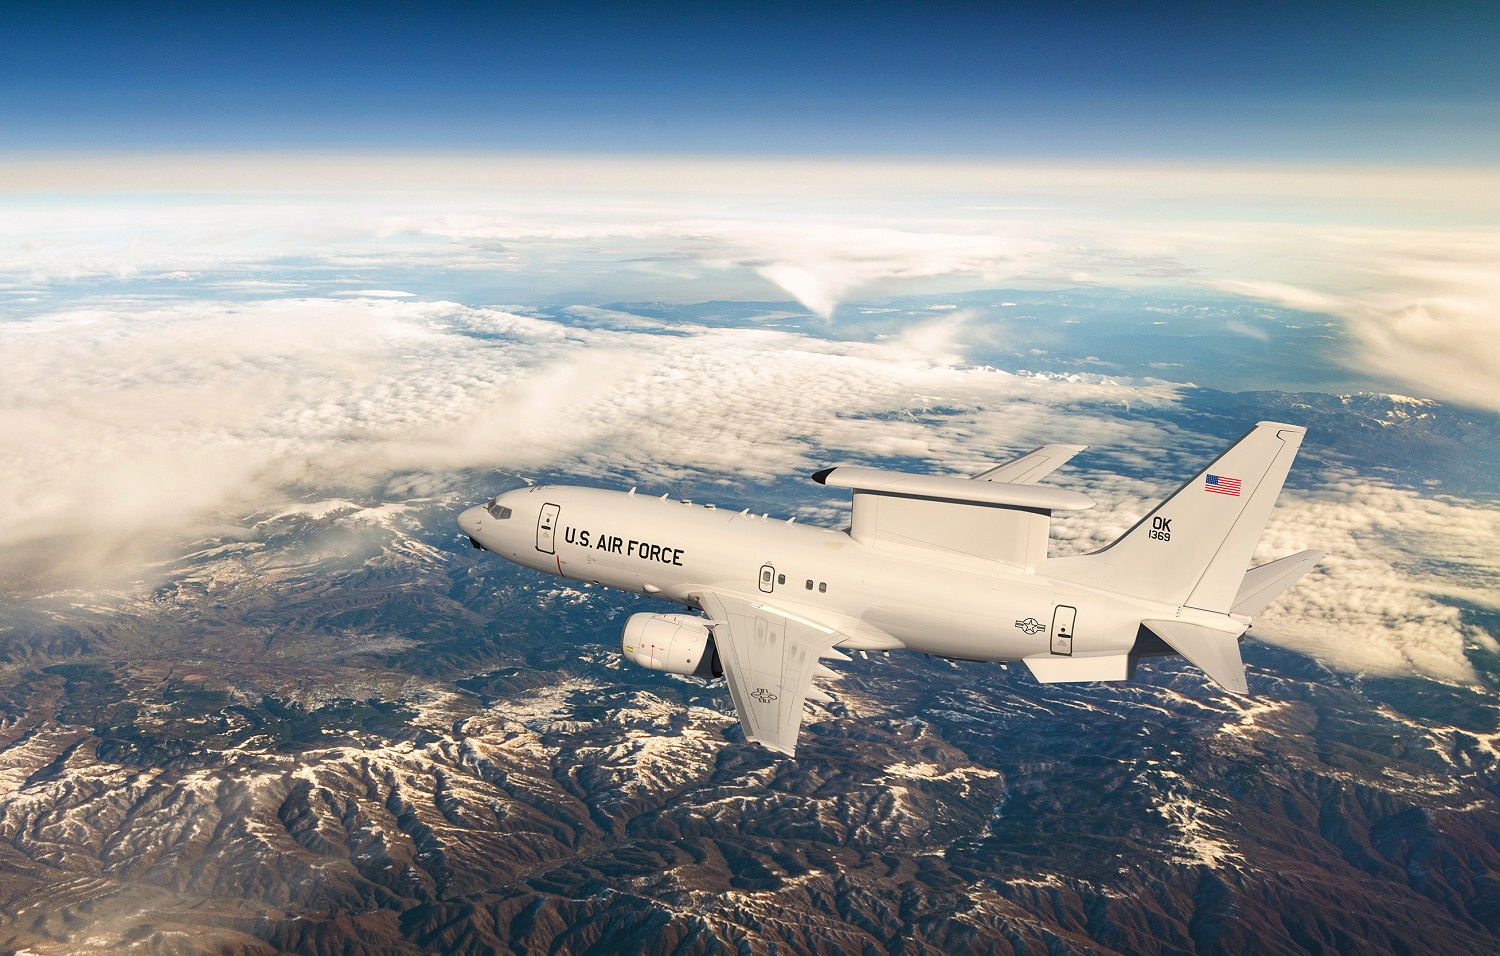 NATO Support and Procurement Agency to Acquire Six Boeing E-7A Wedgetail